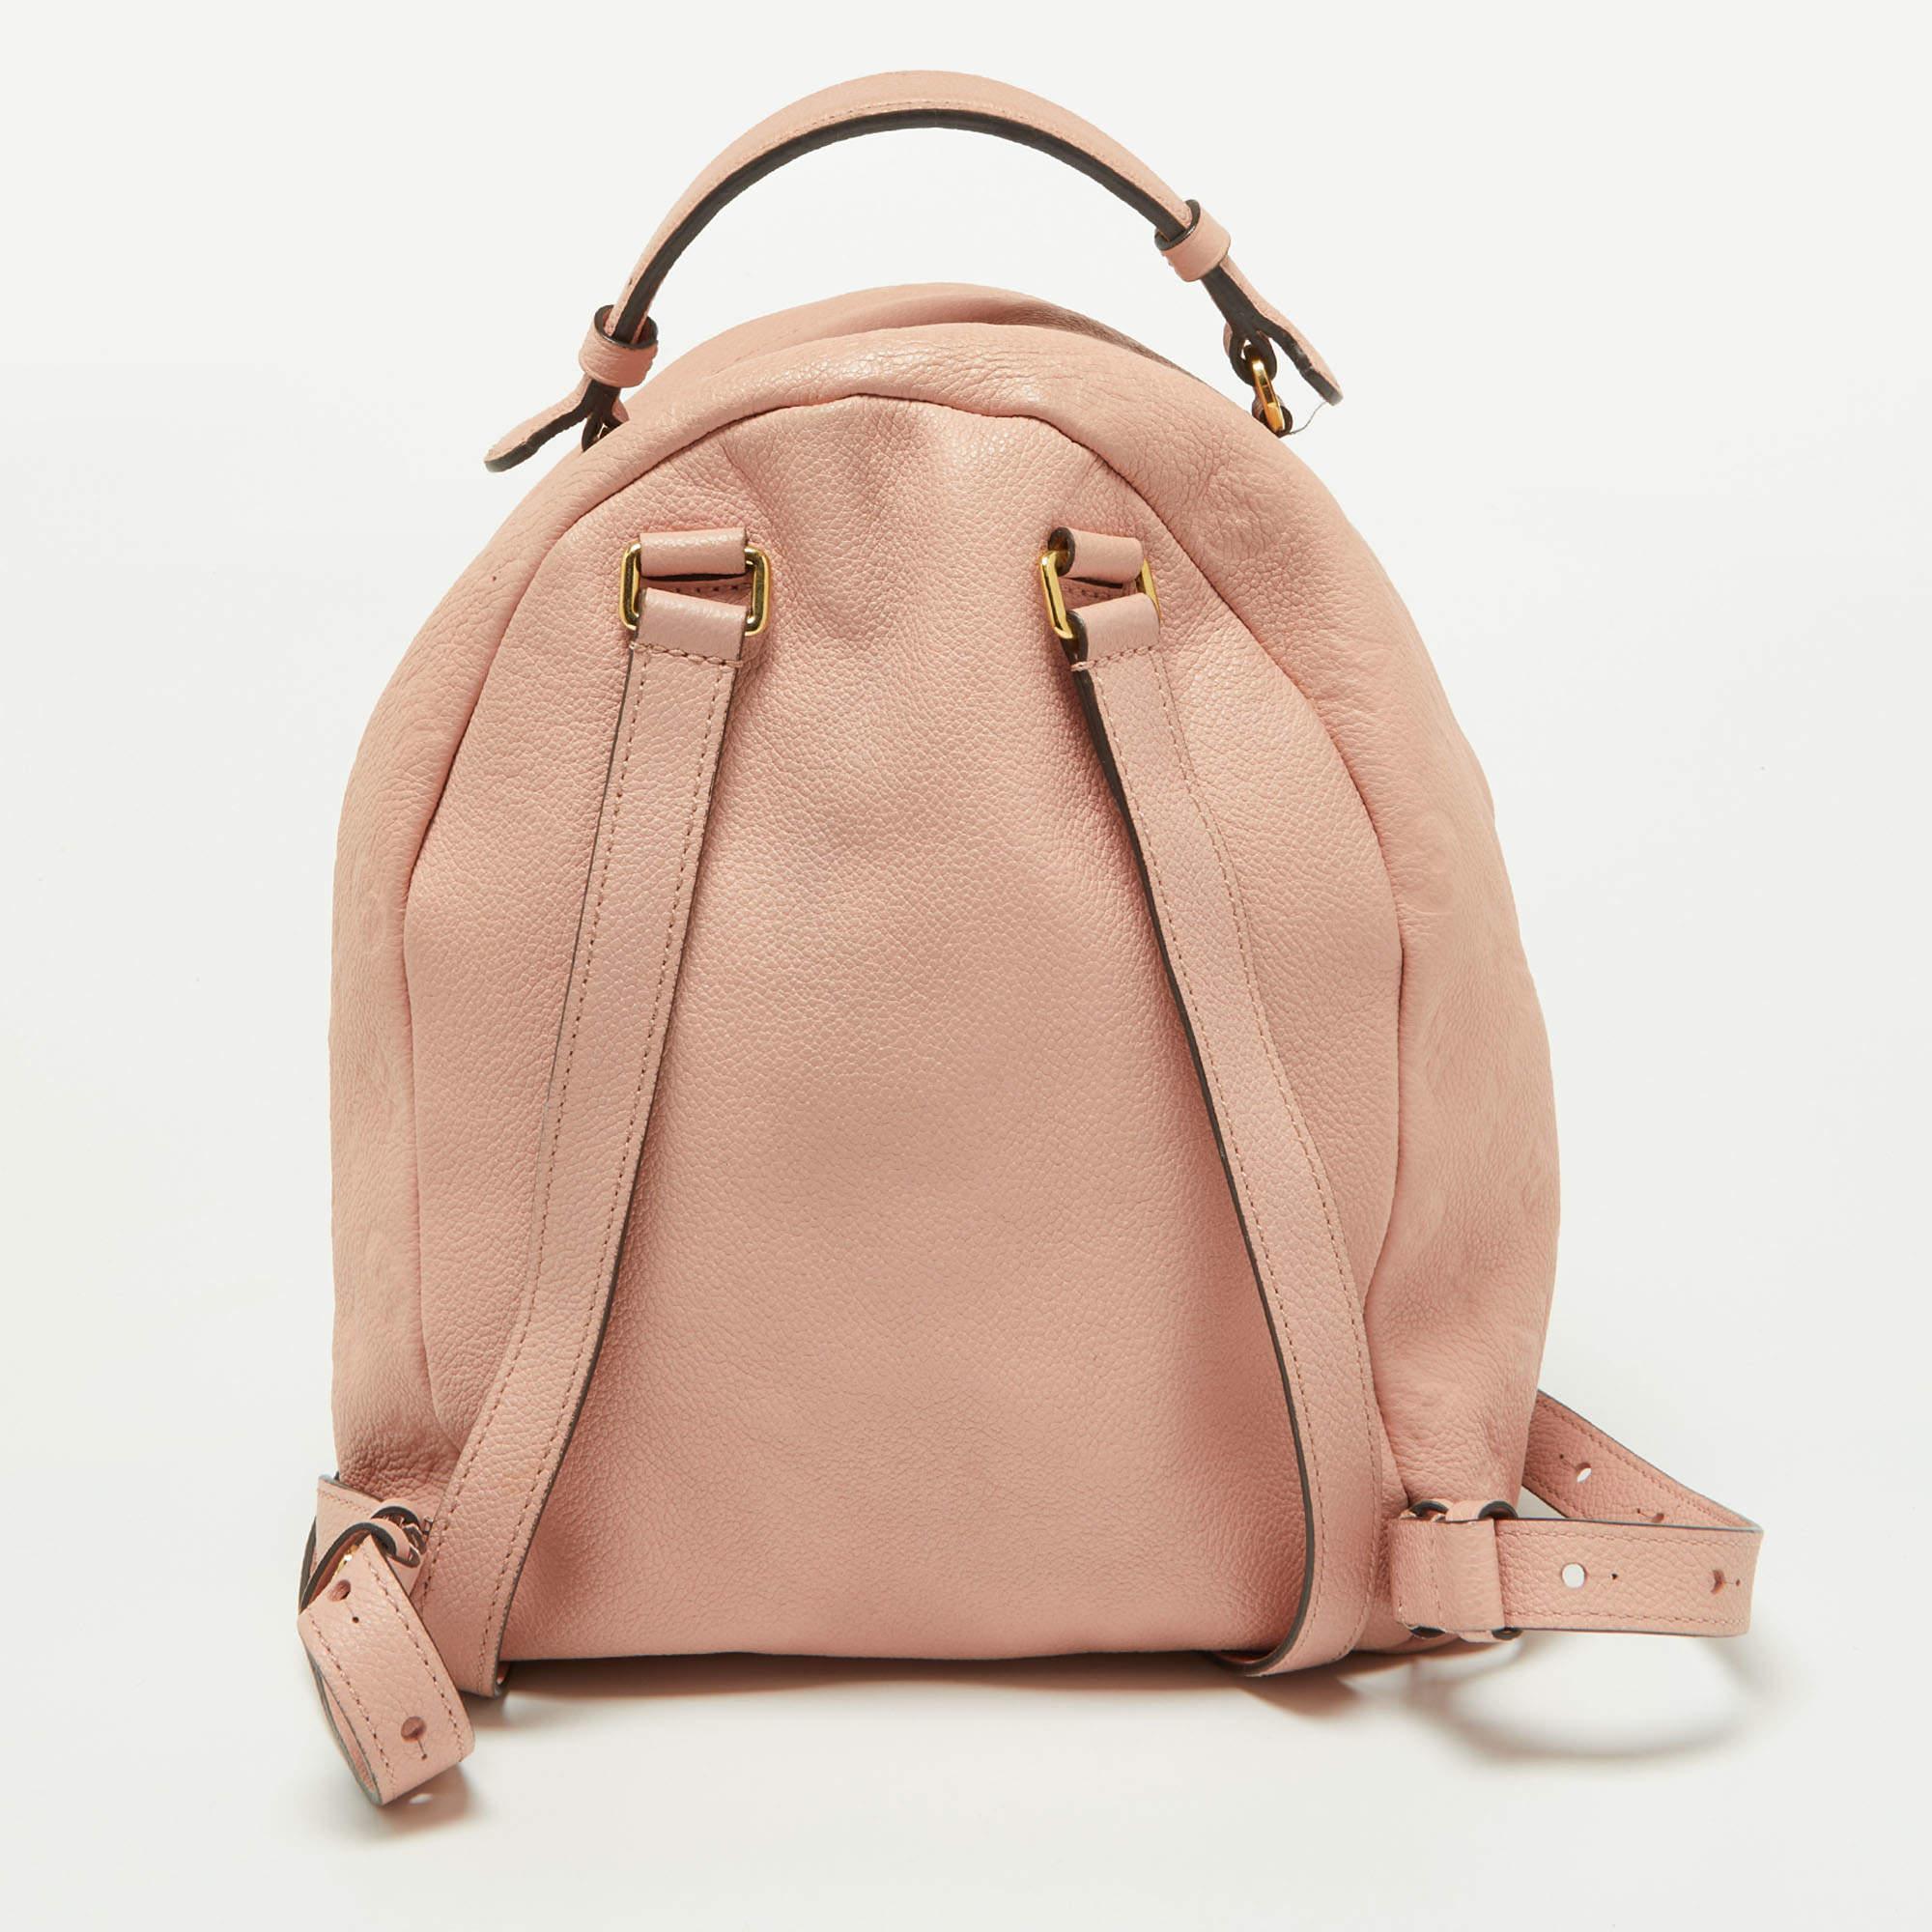 This Sorbonne backpack is an elevating style staple. It has an Empreinte leather exterior with a front zip pocket. The bag has a top handle, two shoulder straps, and a fabric-lined interior. This gorgeous piece will bring you countless days of high